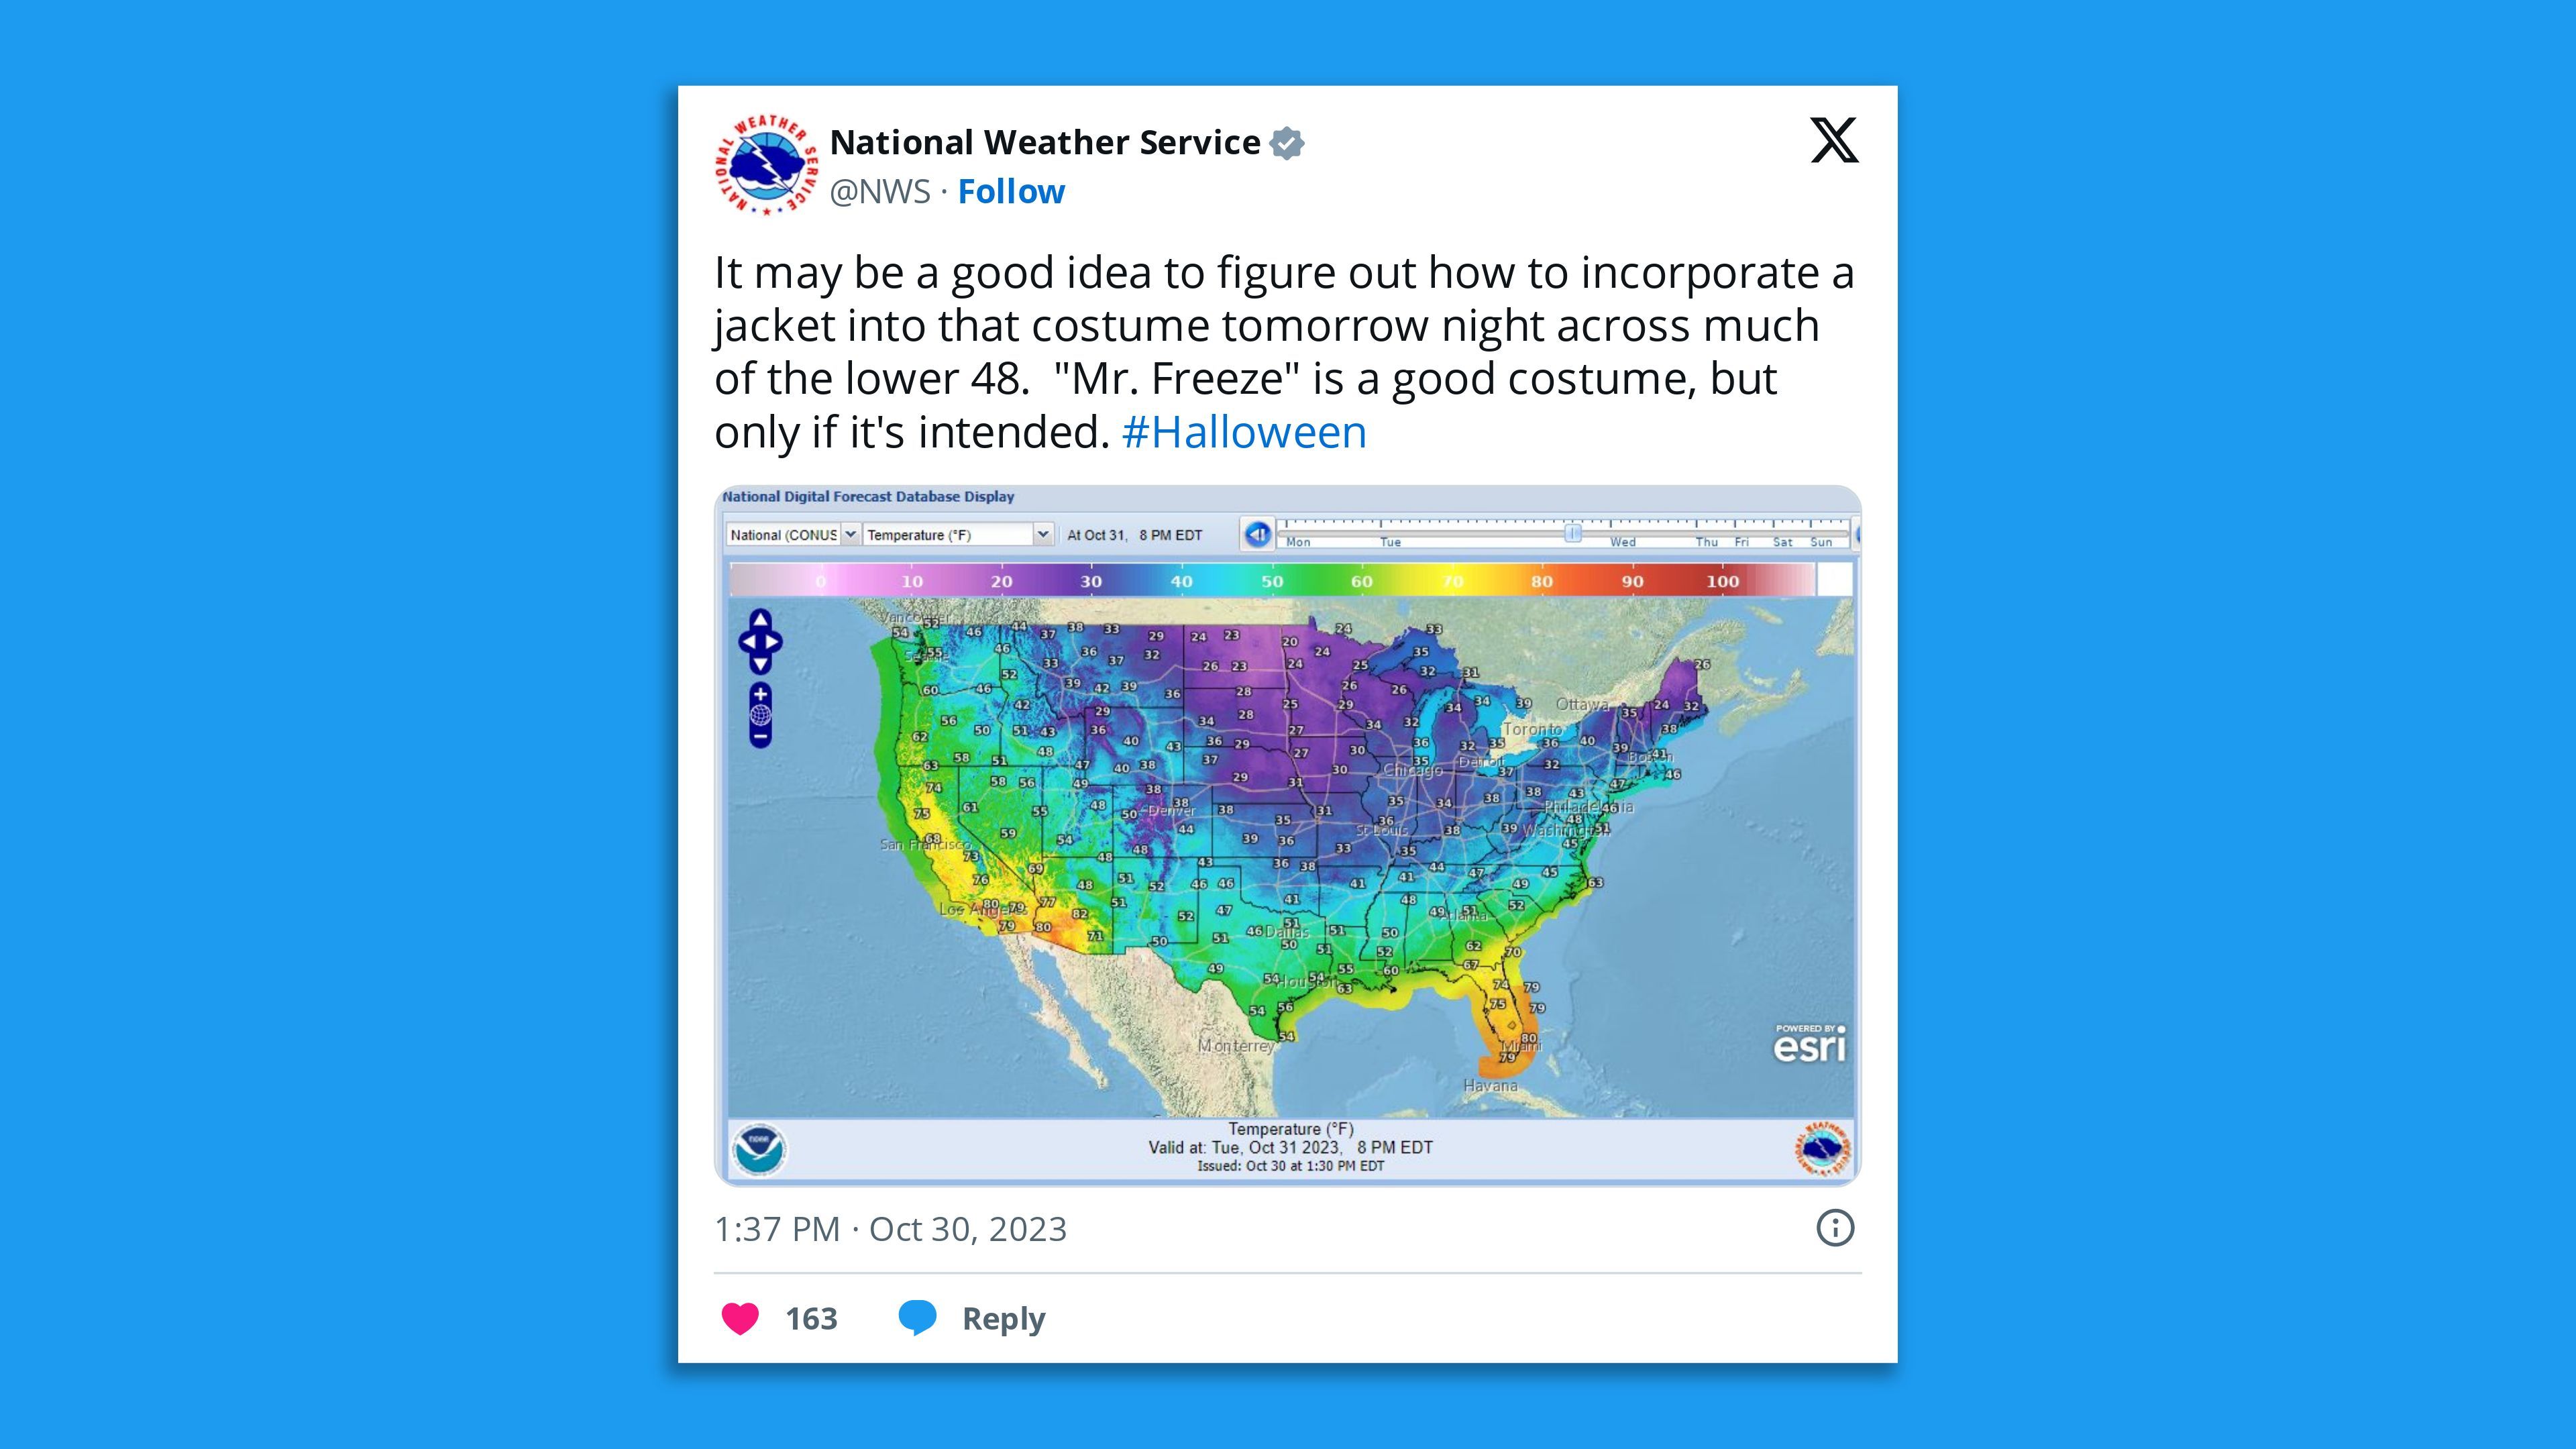 A screenshot of a National Weather Service tweet showing a map of cold temperatures colored in blue in the coldest parts of the U.S., mostly in the east,  with the comment: "It may be a good idea to figure out how to incorporate a jacket into that costume tomorrow night across much of the lower 48.  "Mr. Freeze" is a good costume, but only if it's intended. #Halloween"